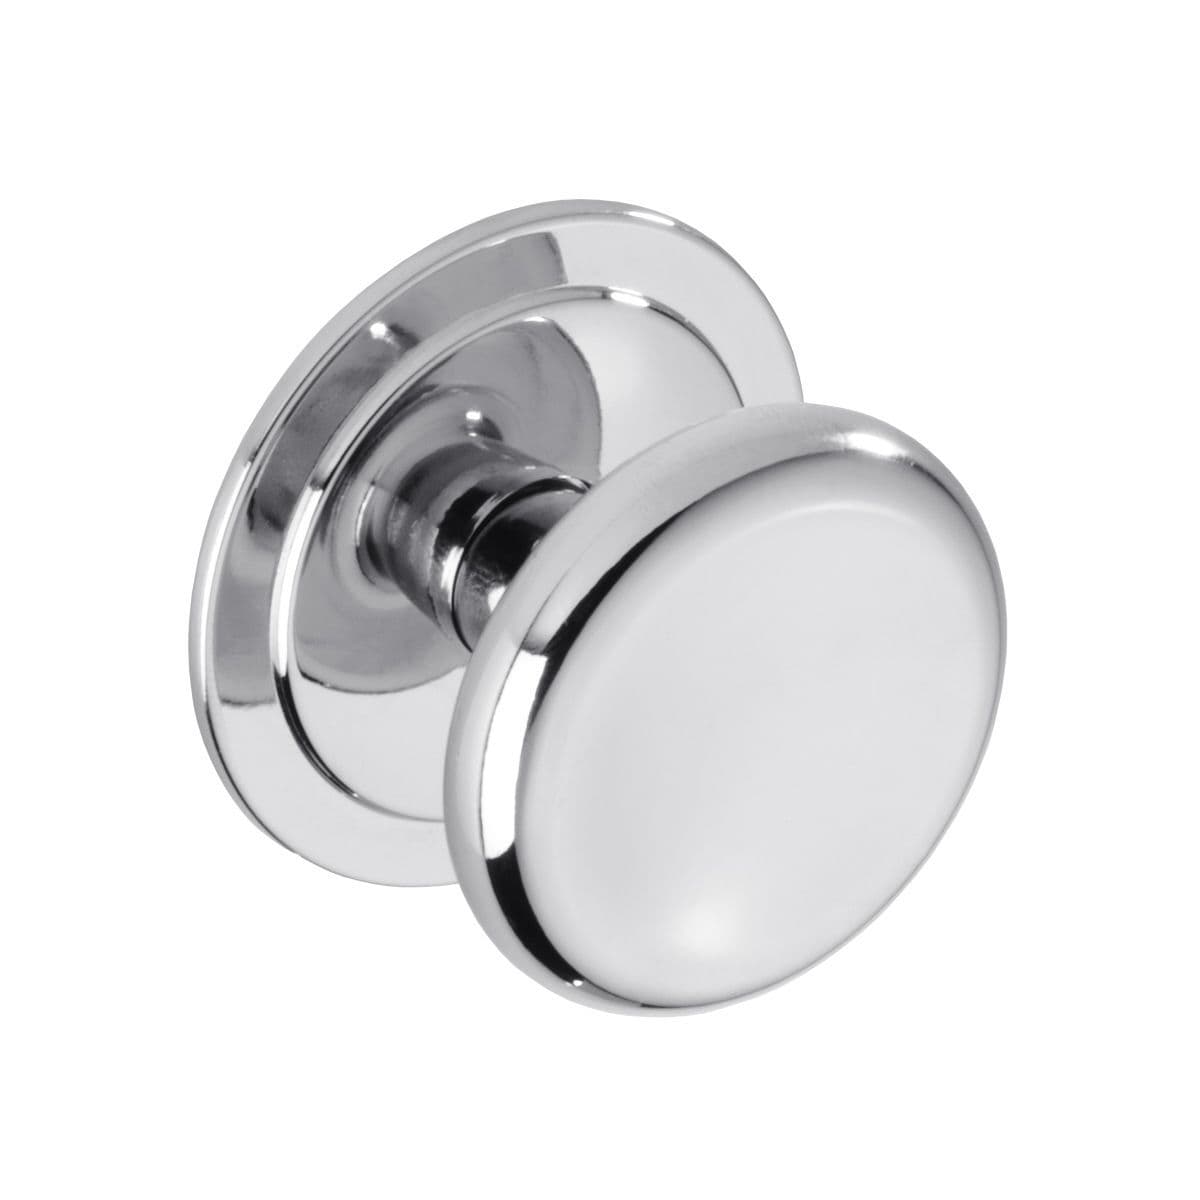 REETH ROUND KNOB Cupboard Handle - 46mm diameter - 4 finishes (PWS K1113.46.CH)